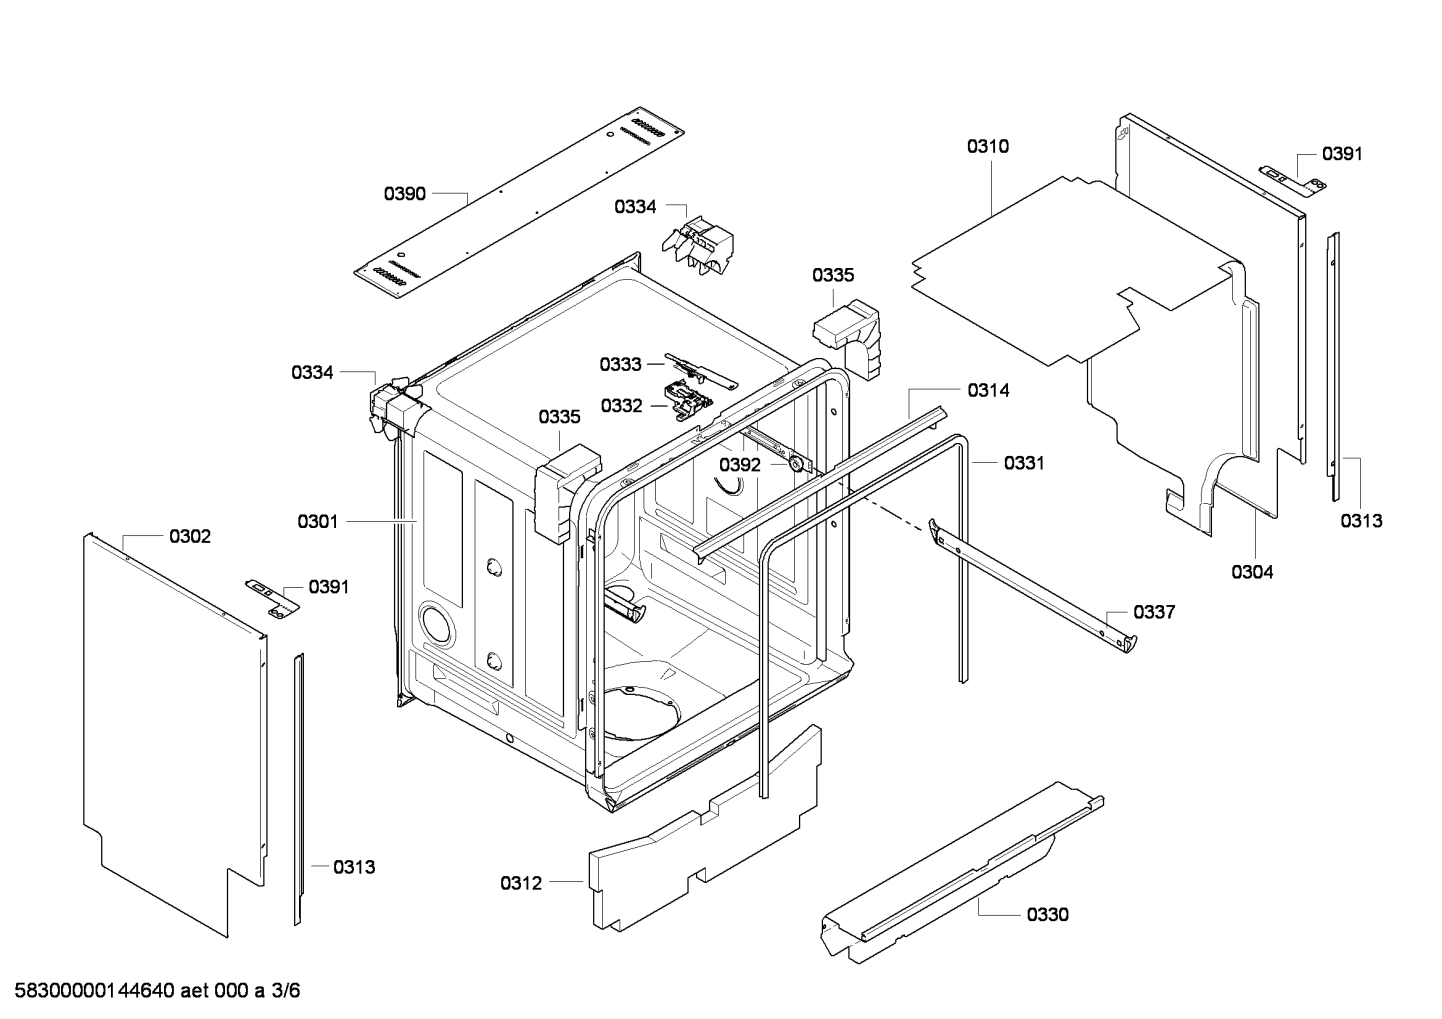 drawing_link_3_device_1633820